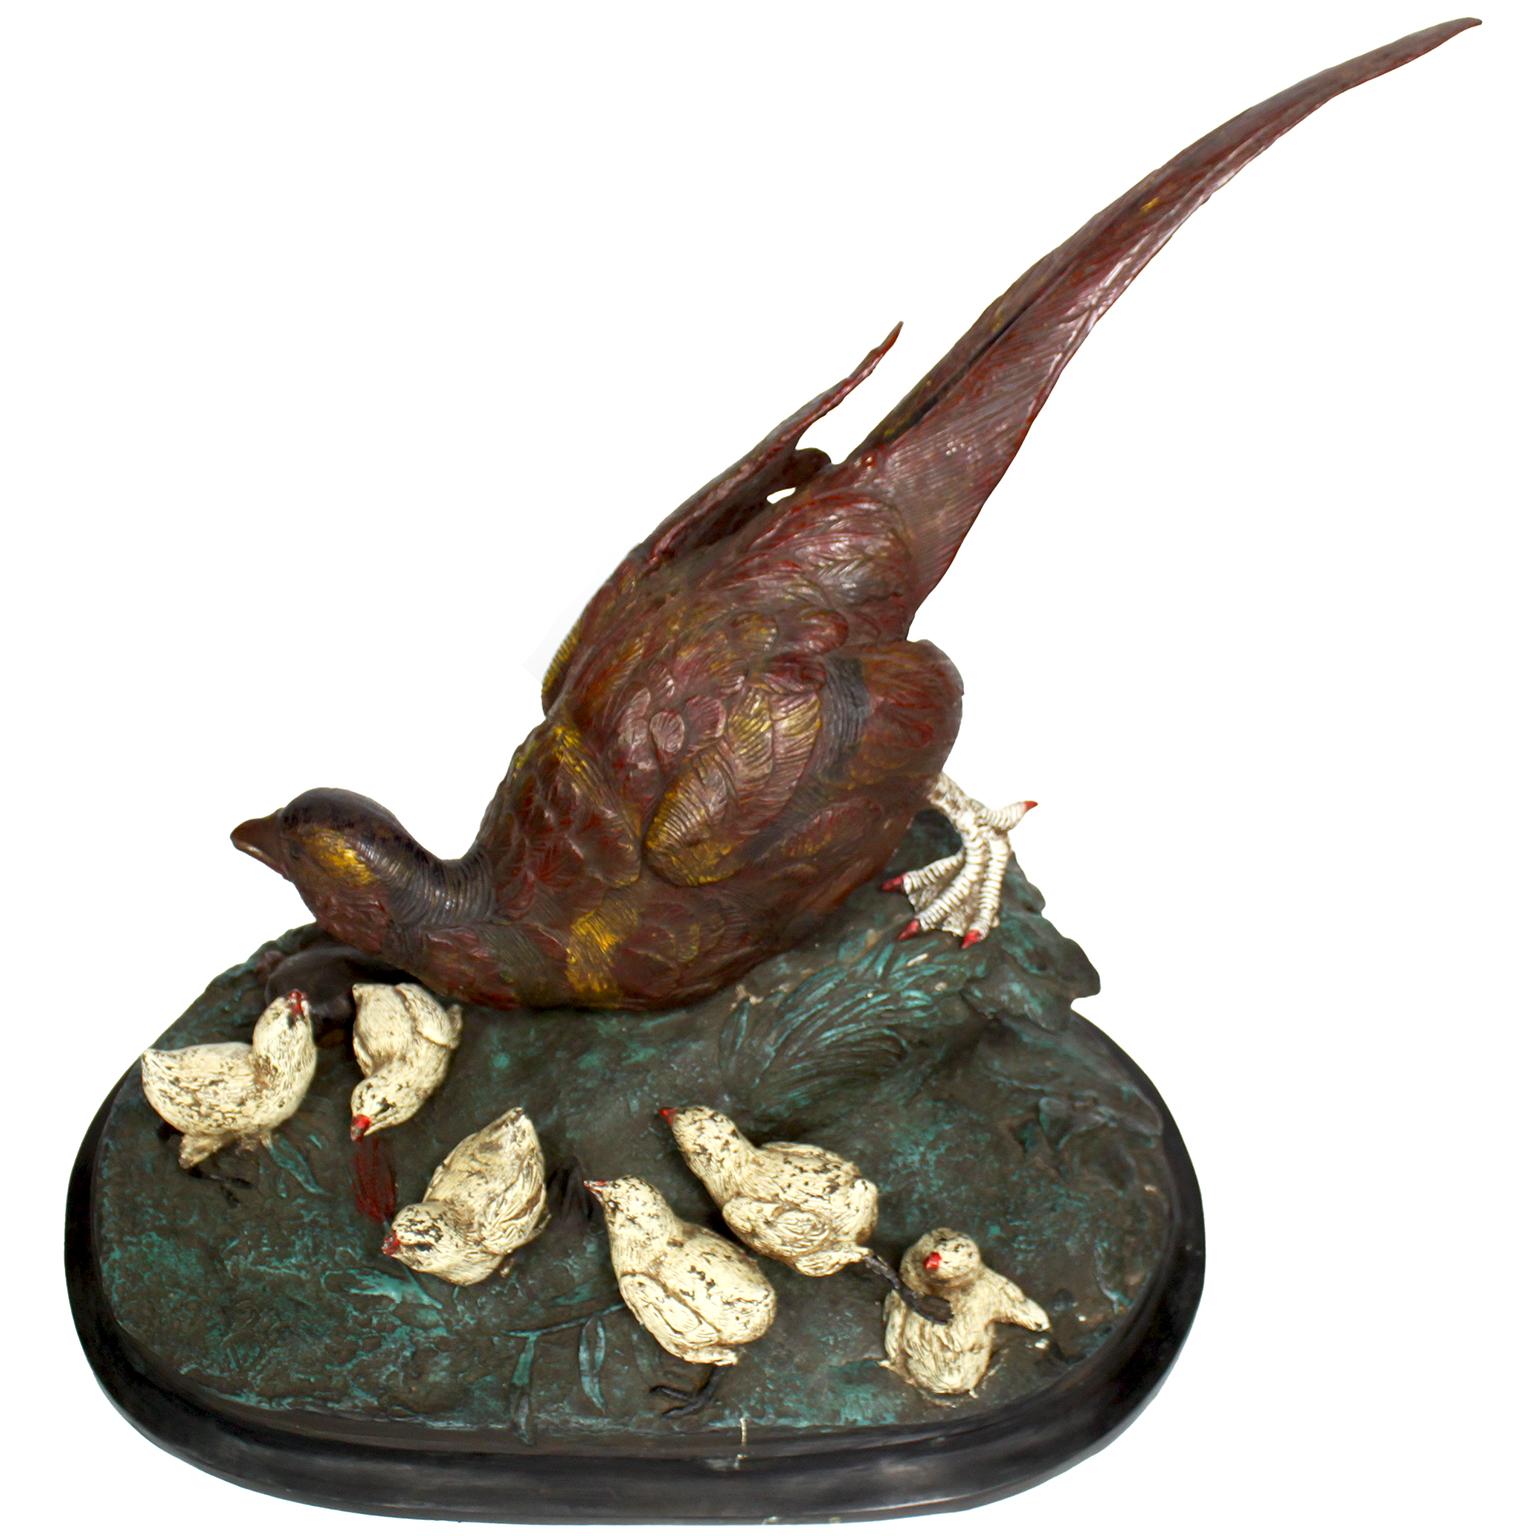 A Large Cold Painted Vienna Style Bronze of A Pheasant with its chicks. The large polychromed bronze sculpture depicting a figure of a pheasant in a green pasture with six white chicks by her side. Signed with a 'B', maker unknown. 

Height: 16 1/2